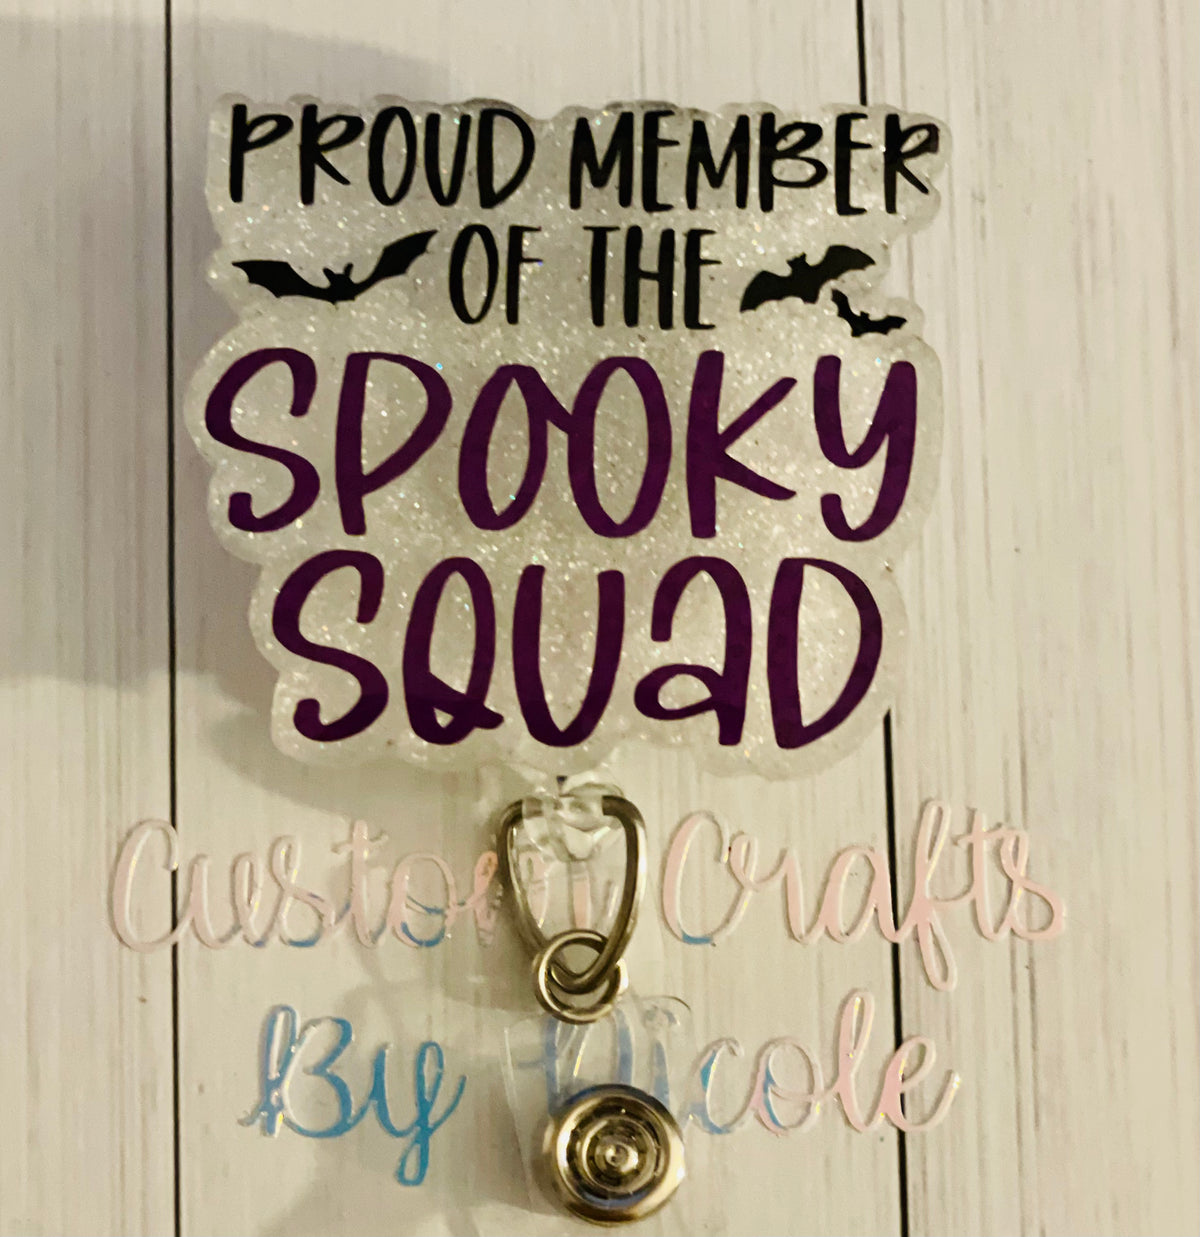 Proud member of the spooky squad